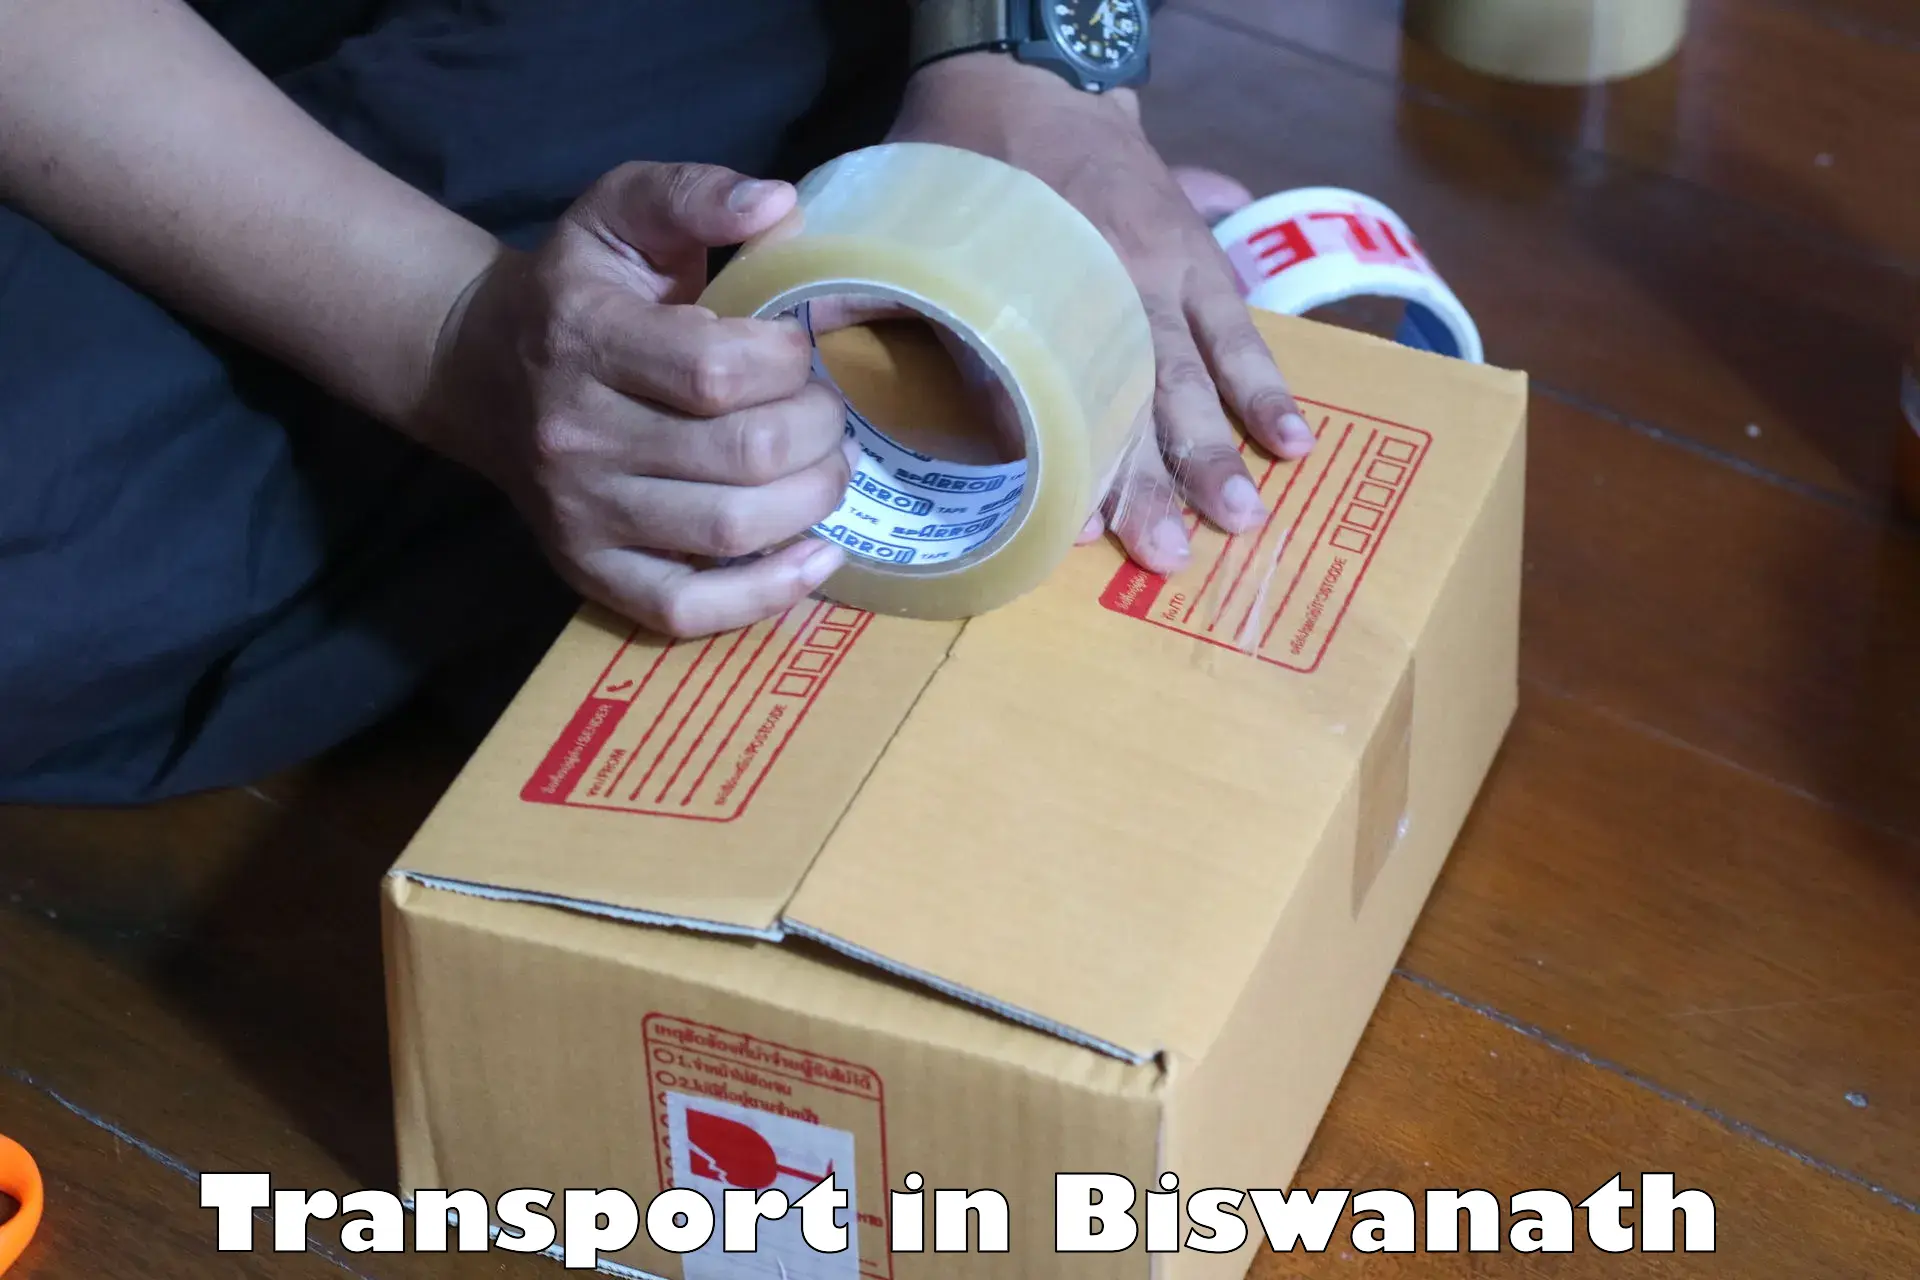 Express transport services in Biswanath